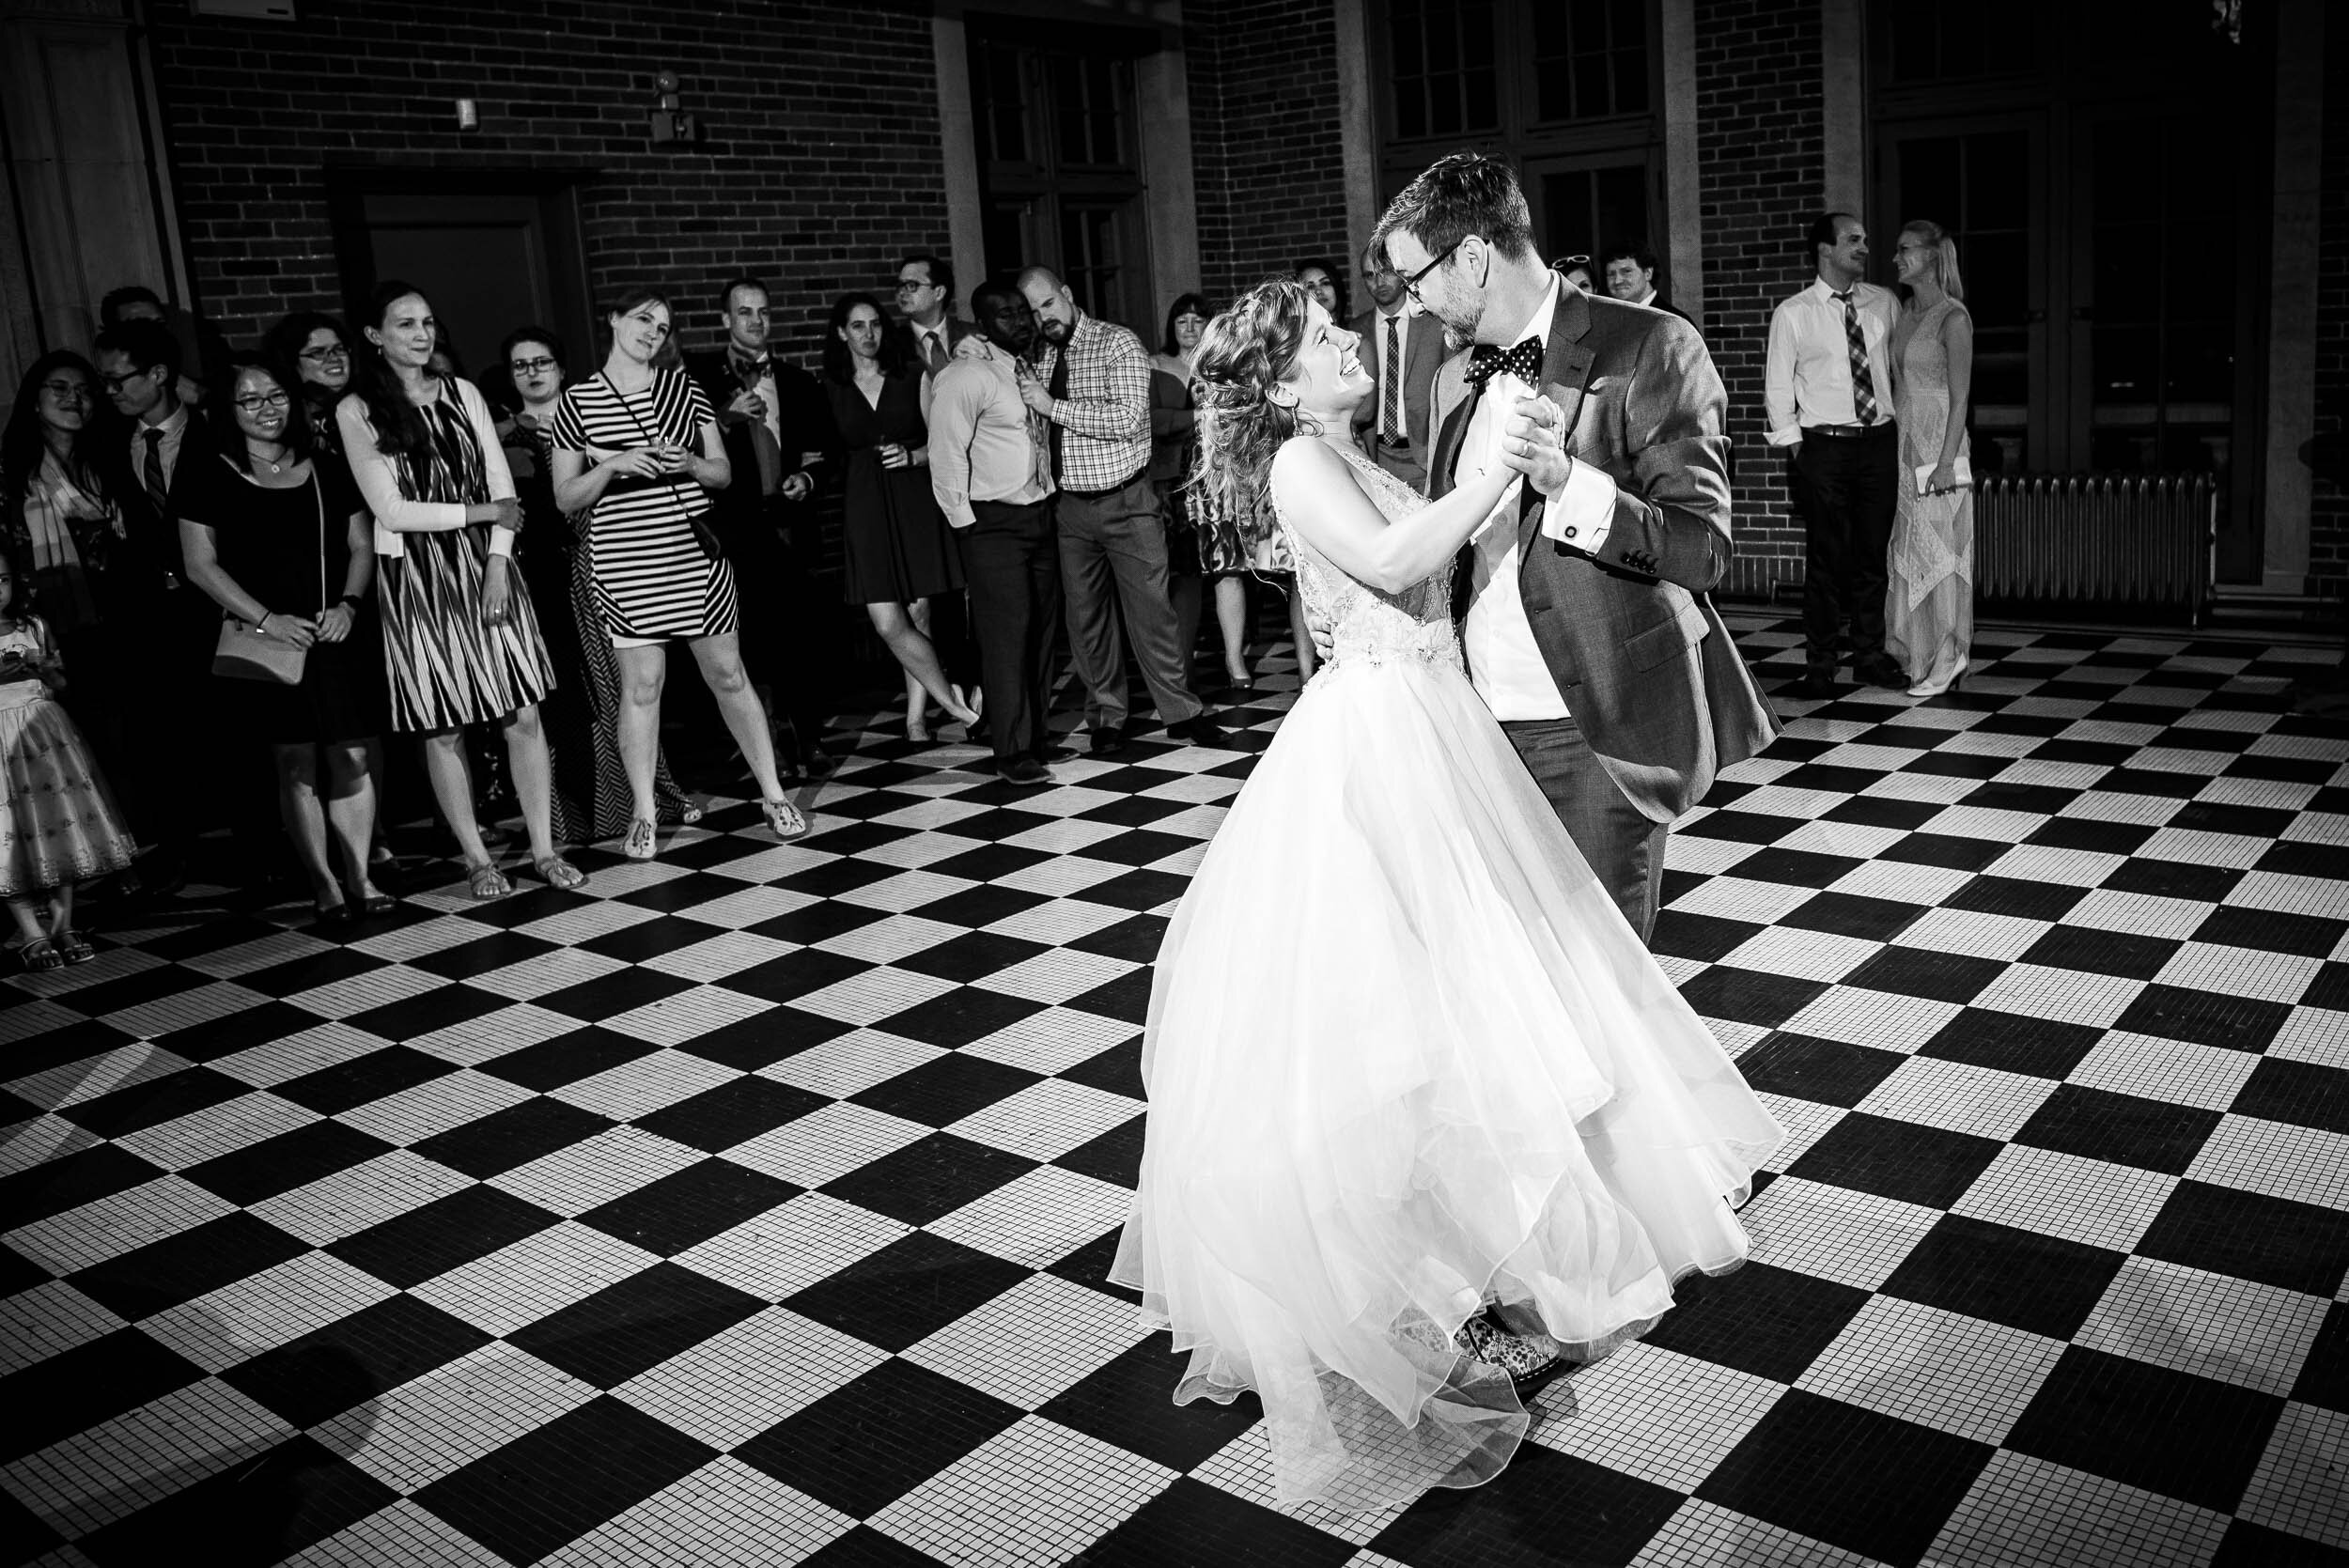 Bride and groom first dance: Columbus Park Refectory Chicago wedding captured by J. Brown Photography.